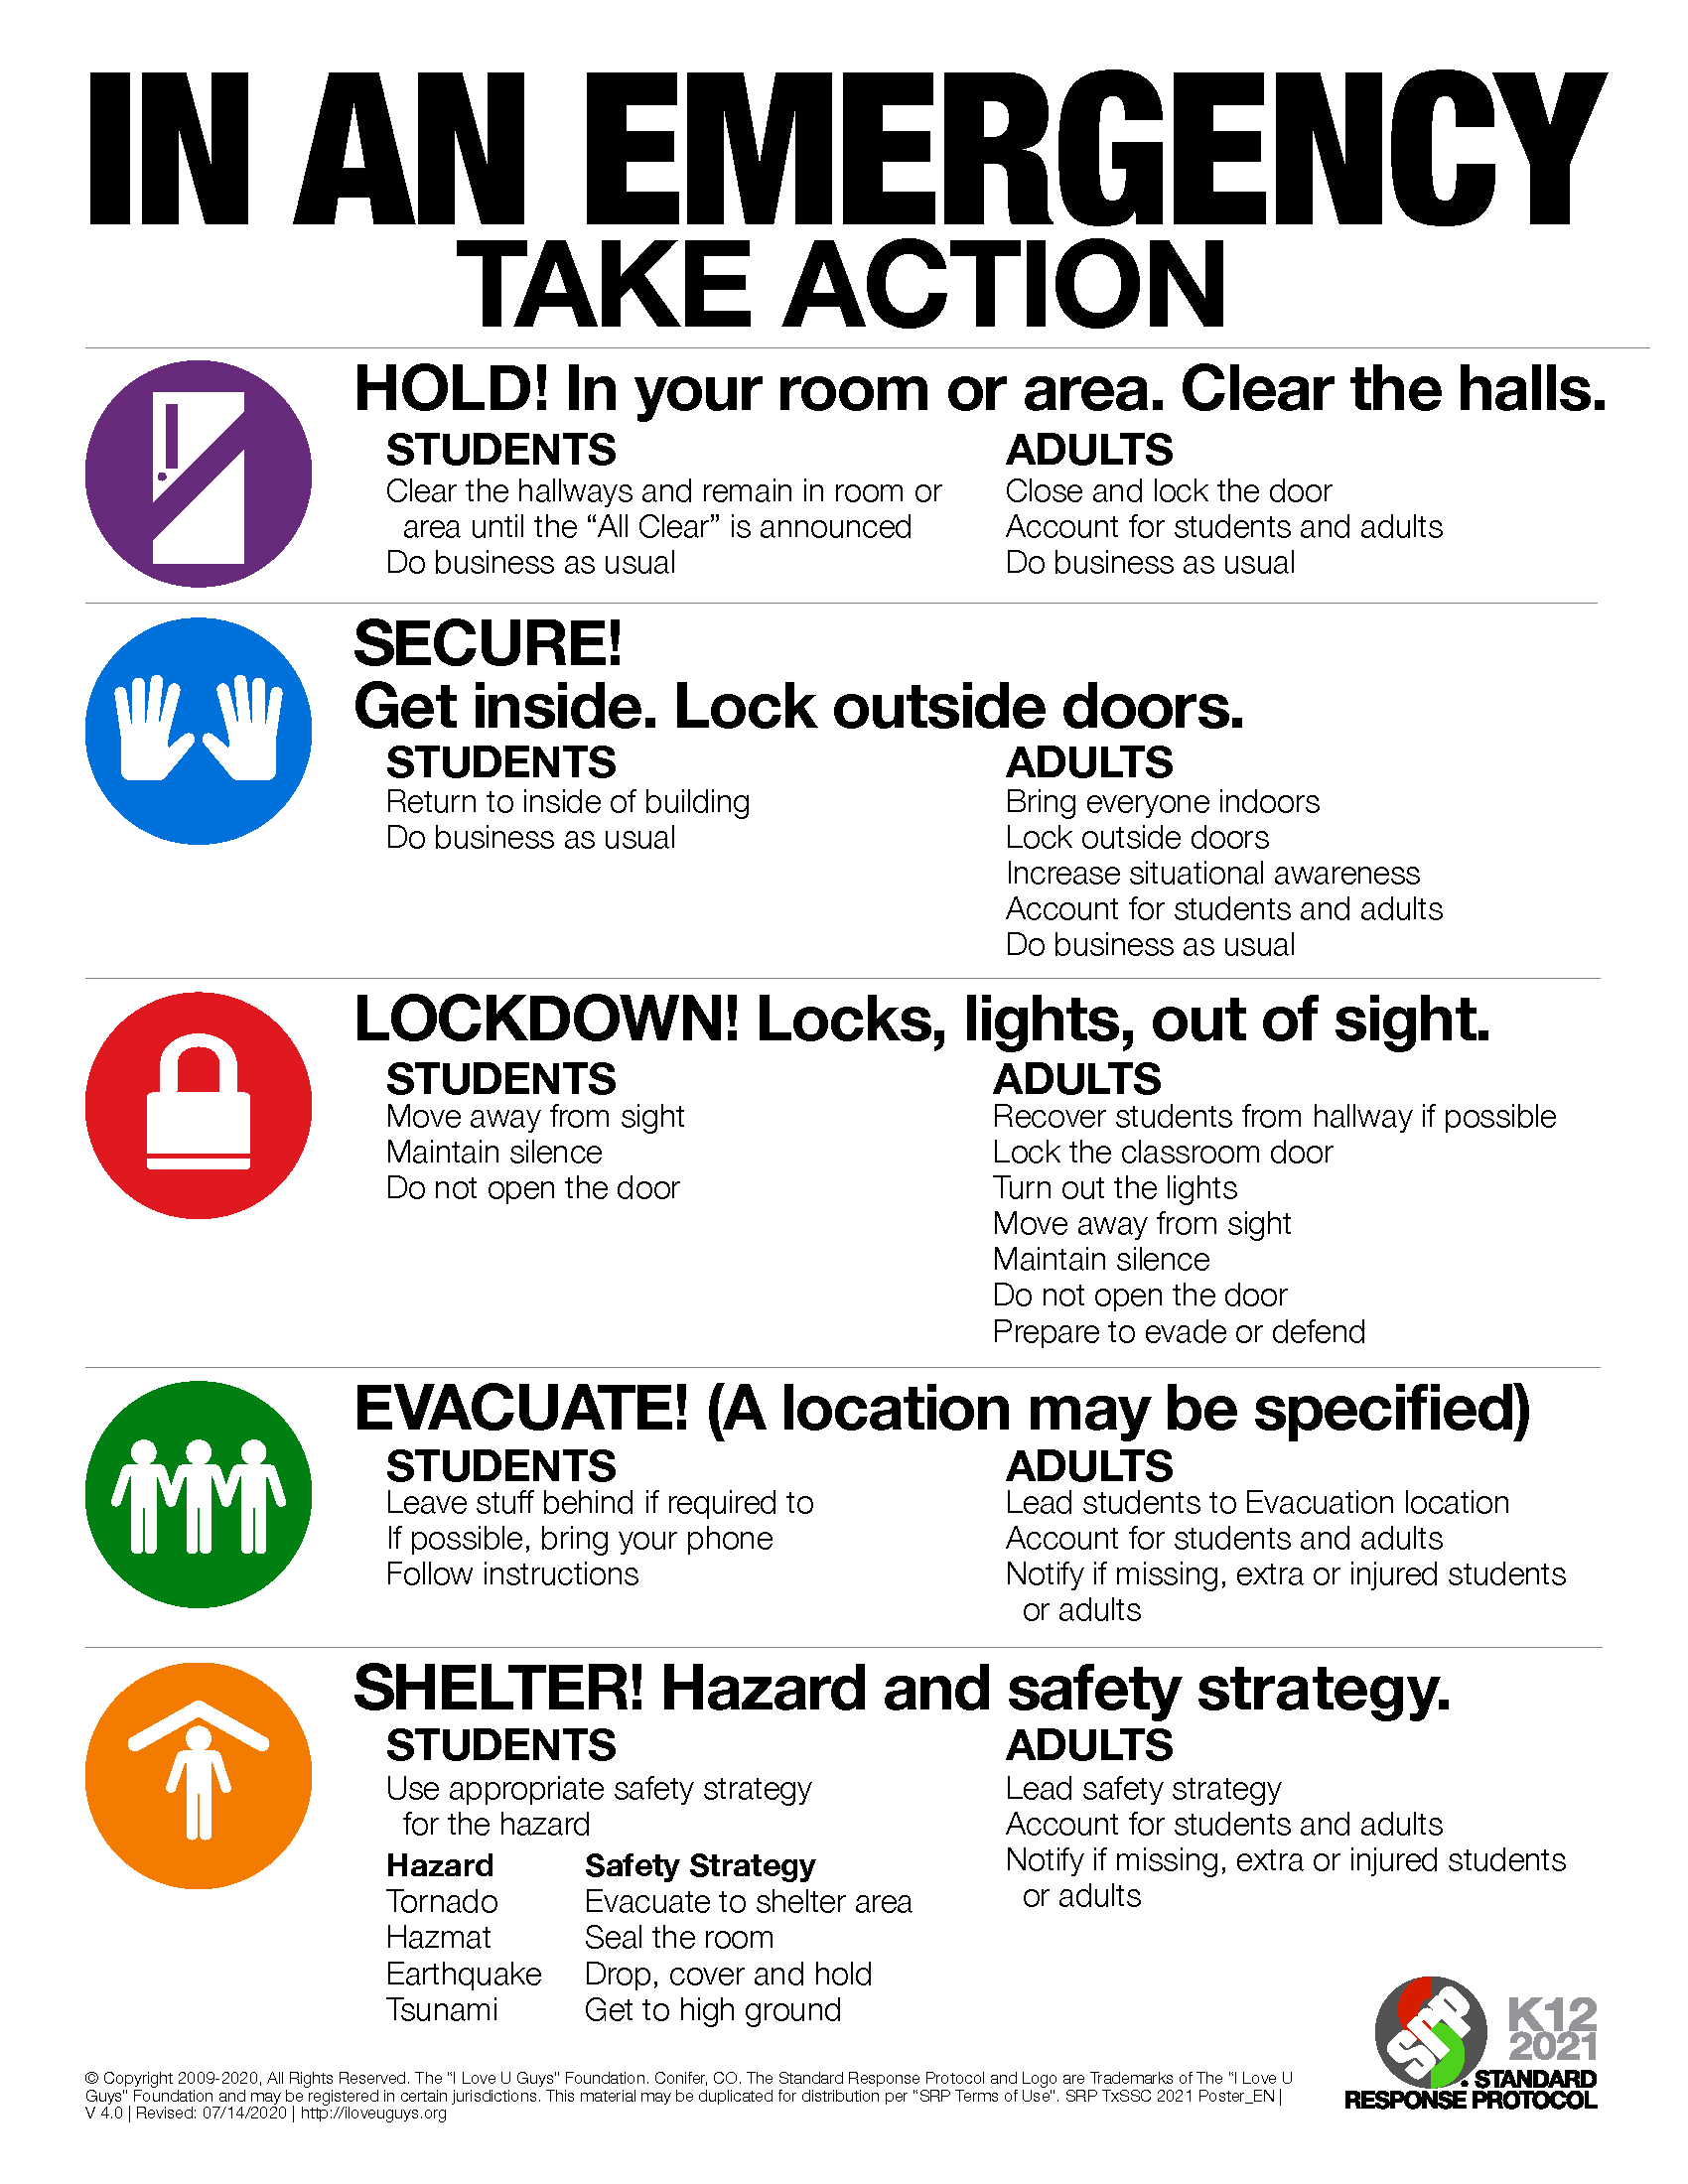 In an emergency take action Hold in your room or area clear the halls secure get inside lock outside doors lockdown locks lights out of sight evacuate a location may be specific shelter hazard and safety strategy